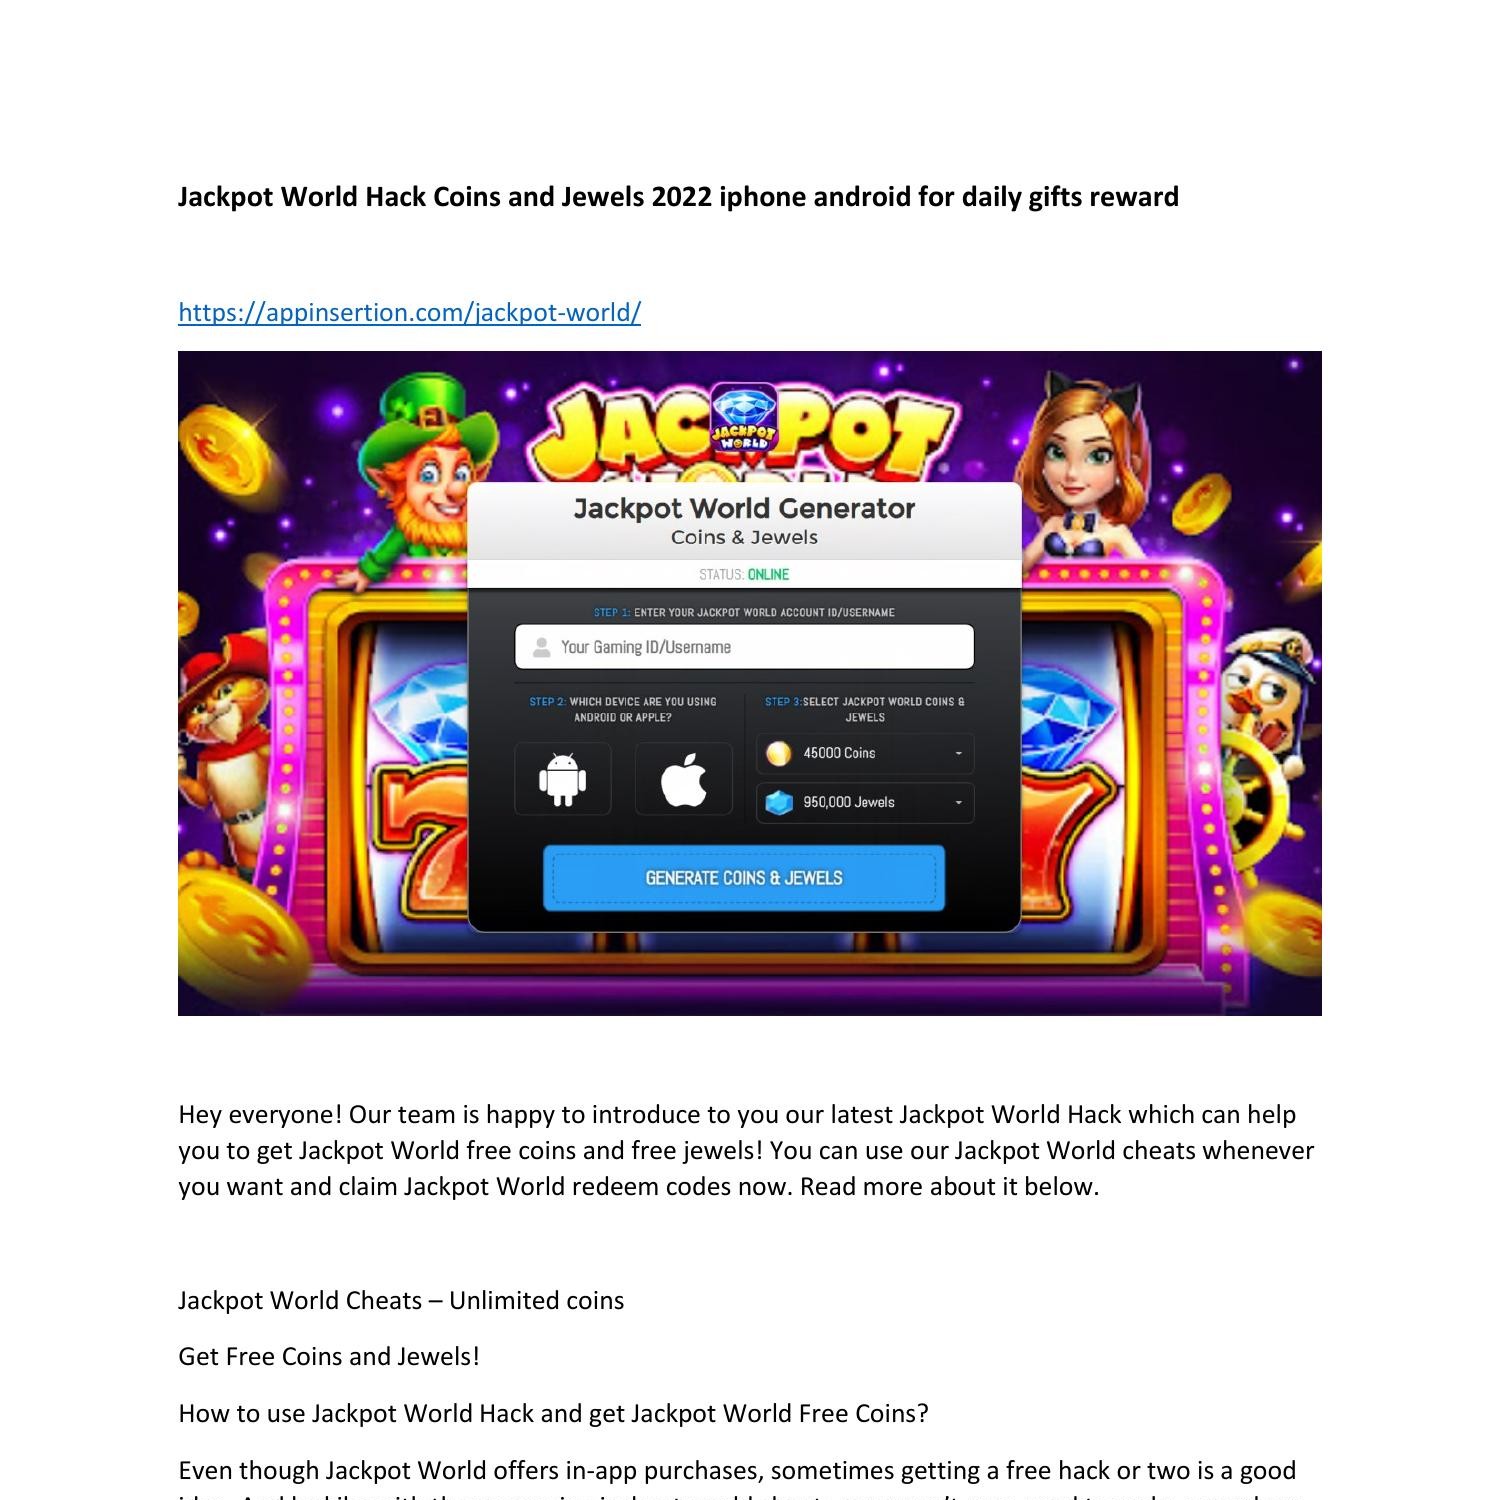 Jackpot World Gift Codes Jackpot World Hack Coins and Jewels 2022 iphone android for daily gifts  reward.pdf | DocDroid